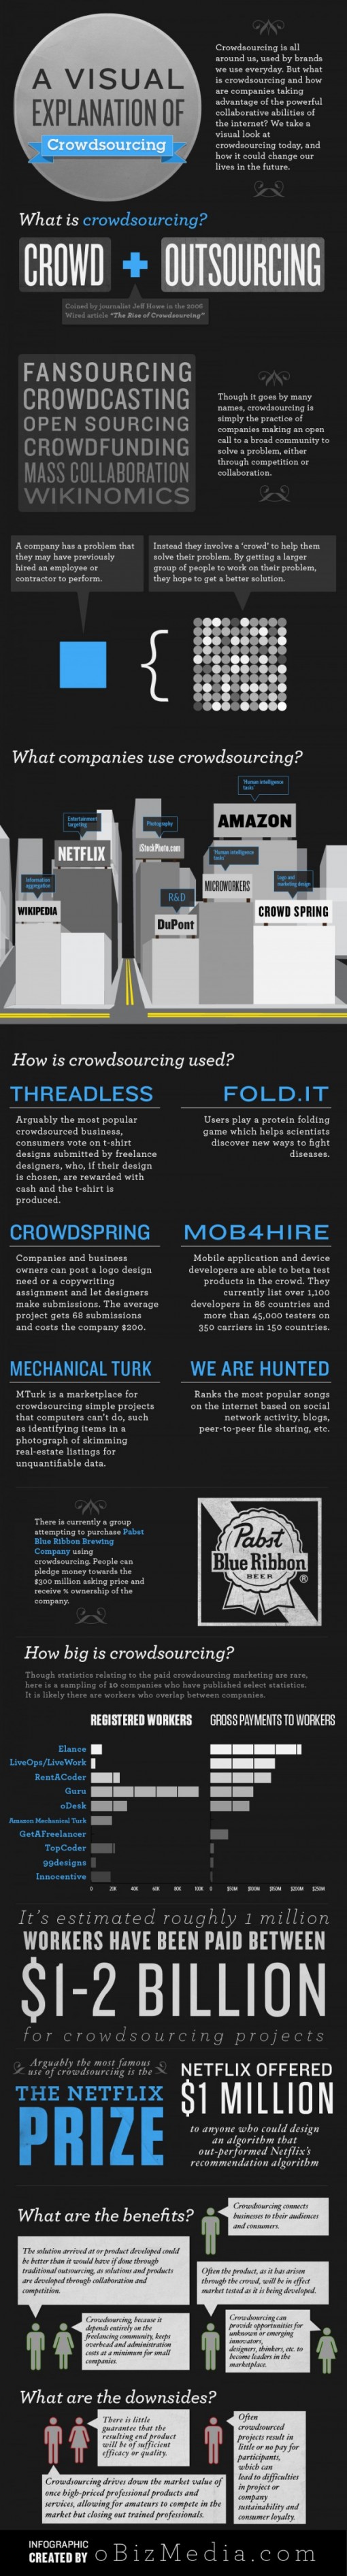 Crowdsourcing Infographic